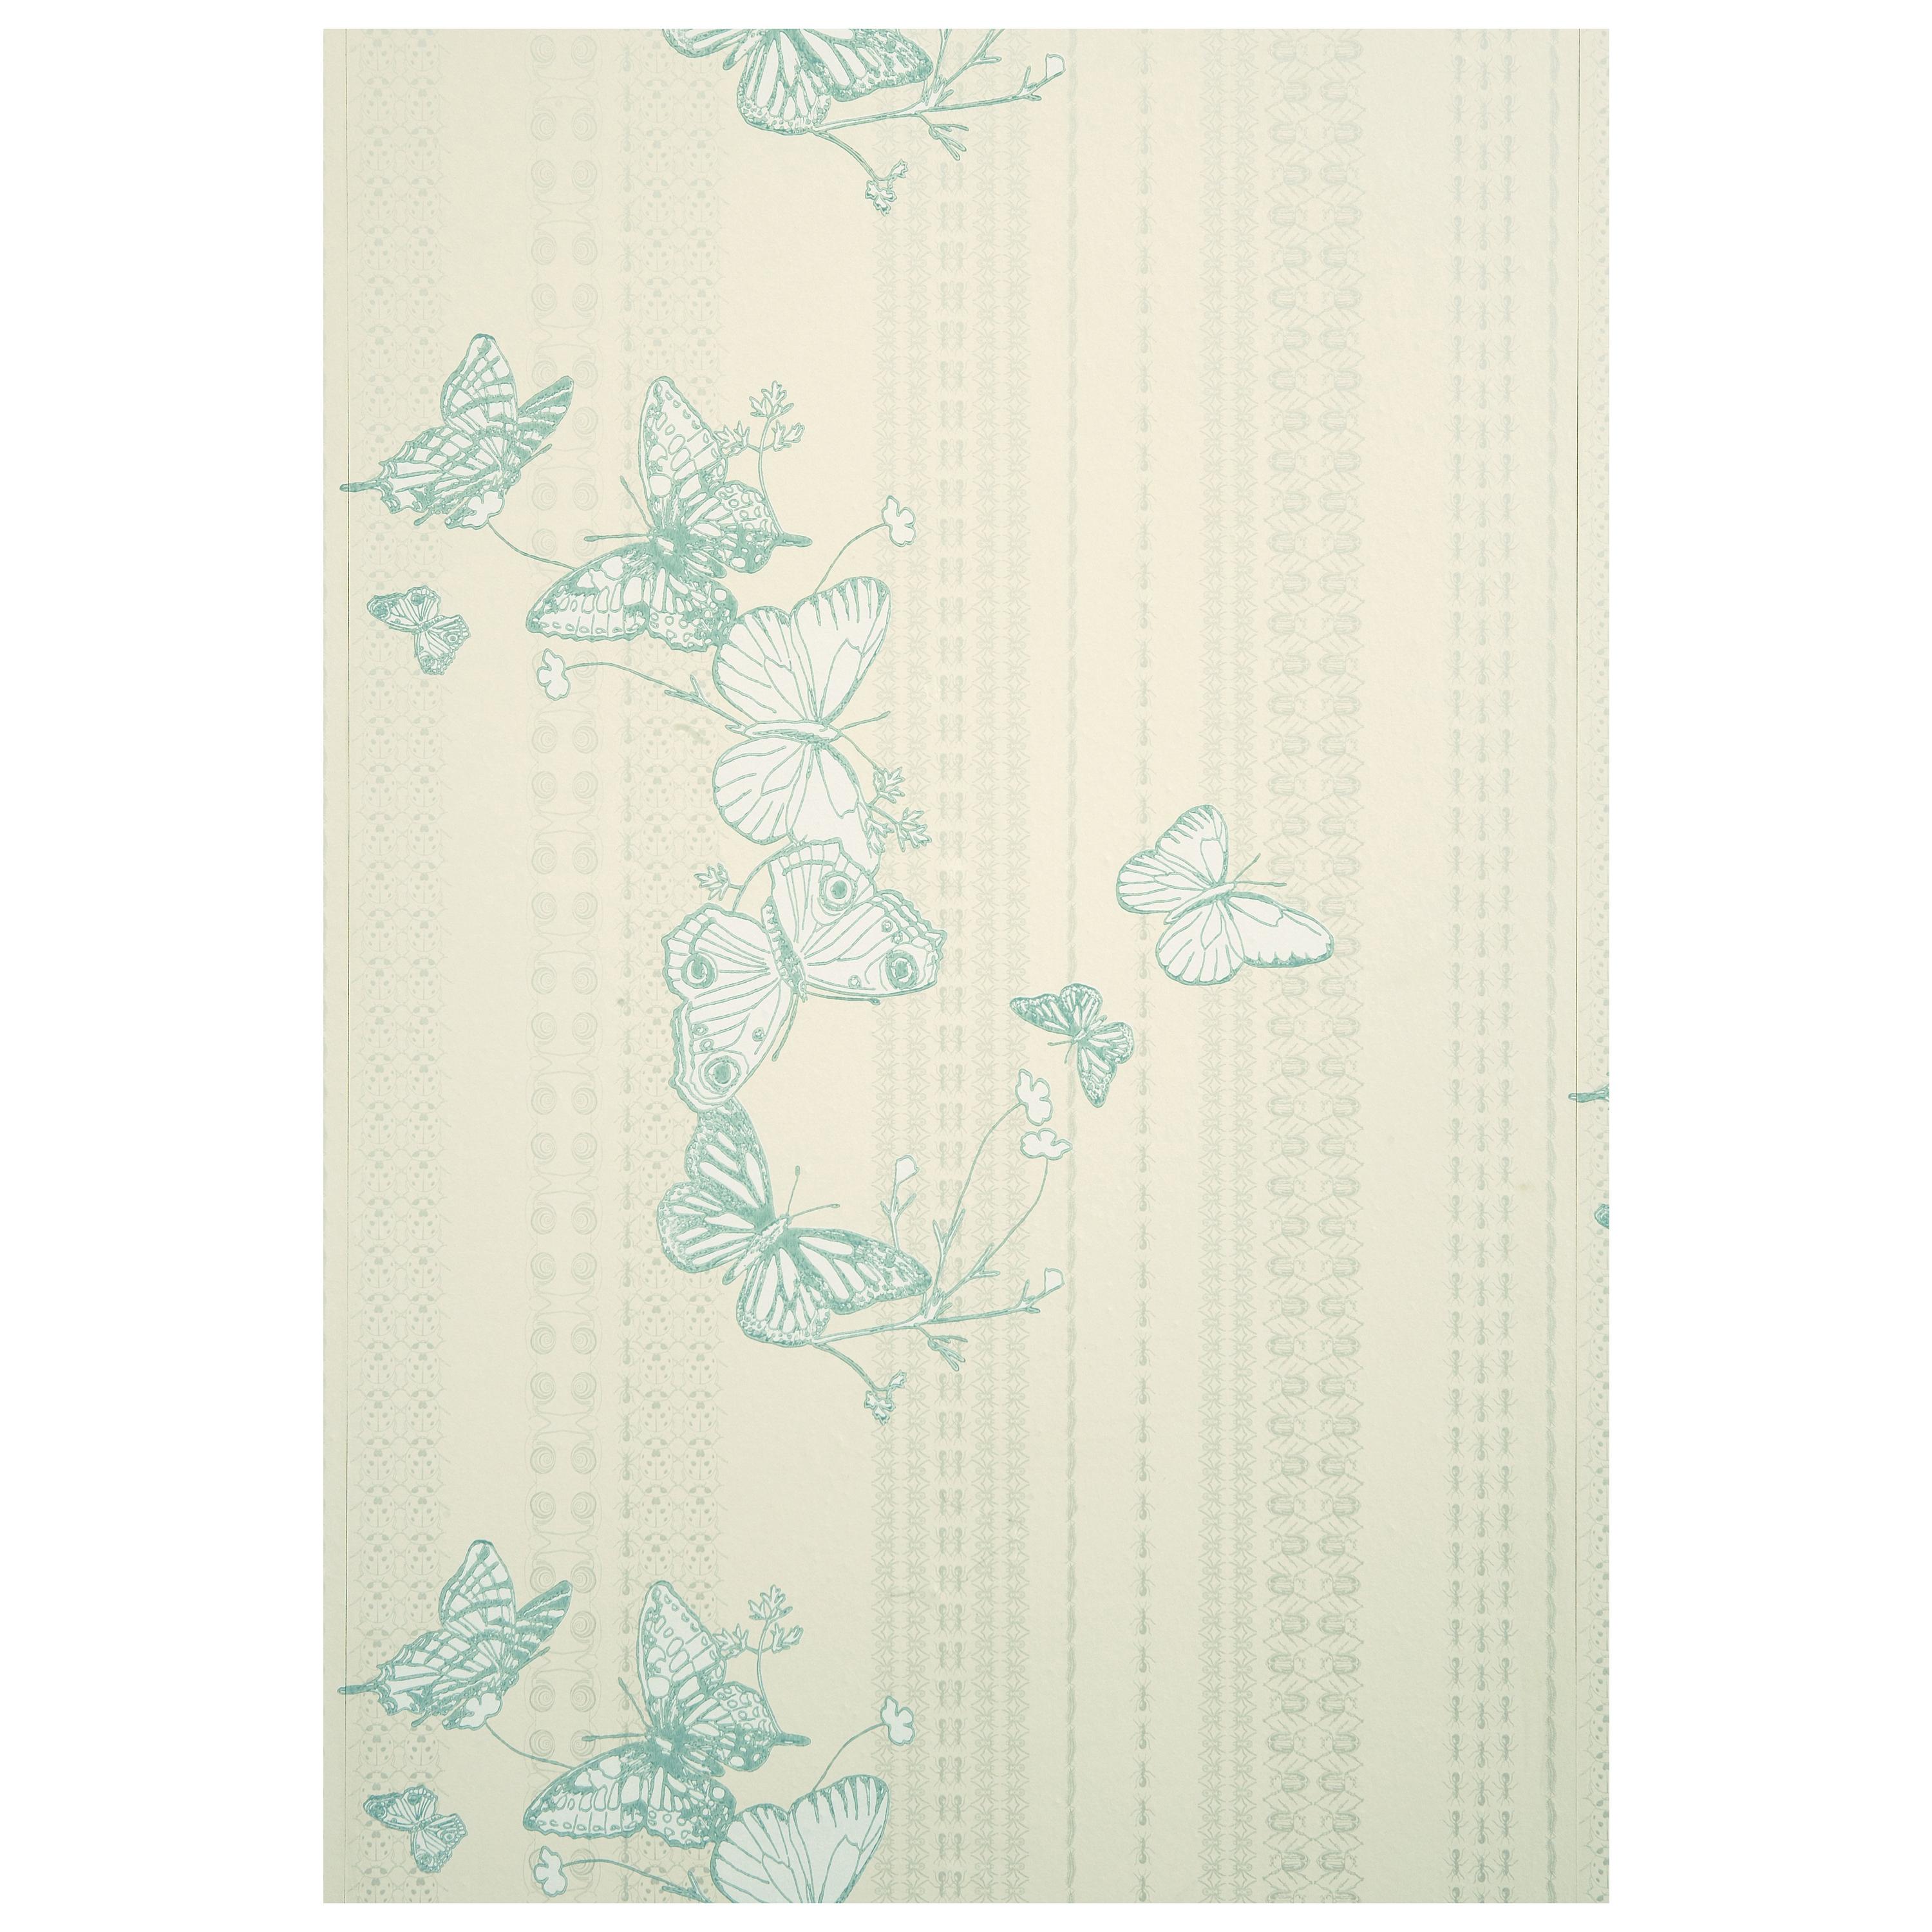 'Bugs & Butterflies' Contemporary, Traditional Wallpaper in Ice Blue im Angebot